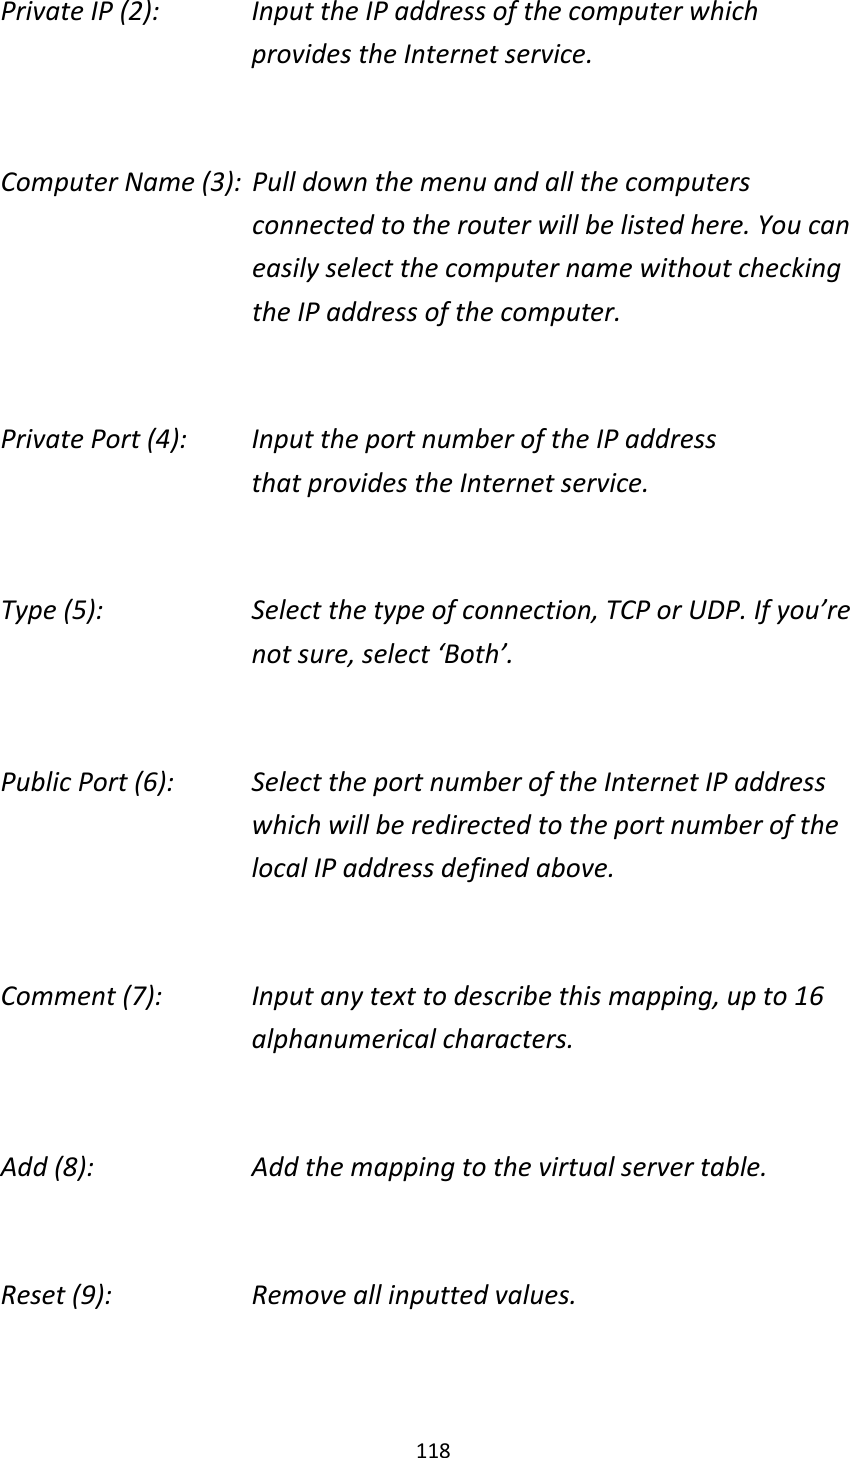 118 Private IP (2):      Input the IP address of the computer which           provides the Internet service.  Computer Name (3):  Pull down the menu and all the computers connected to the router will be listed here. You can easily select the computer name without checking the IP address of the computer.  Private Port (4):    Input the port number of the IP address           that provides the Internet service.  Type (5):    Select the type of connection, TCP or UDP. If you’re not sure, select ‘Both’.  Public Port (6):    Select the port number of the Internet IP address which will be redirected to the port number of the local IP address defined above.  Comment (7):    Input any text to describe this mapping, up to 16 alphanumerical characters.  Add (8):        Add the mapping to the virtual server table.  Reset (9):      Remove all inputted values.  